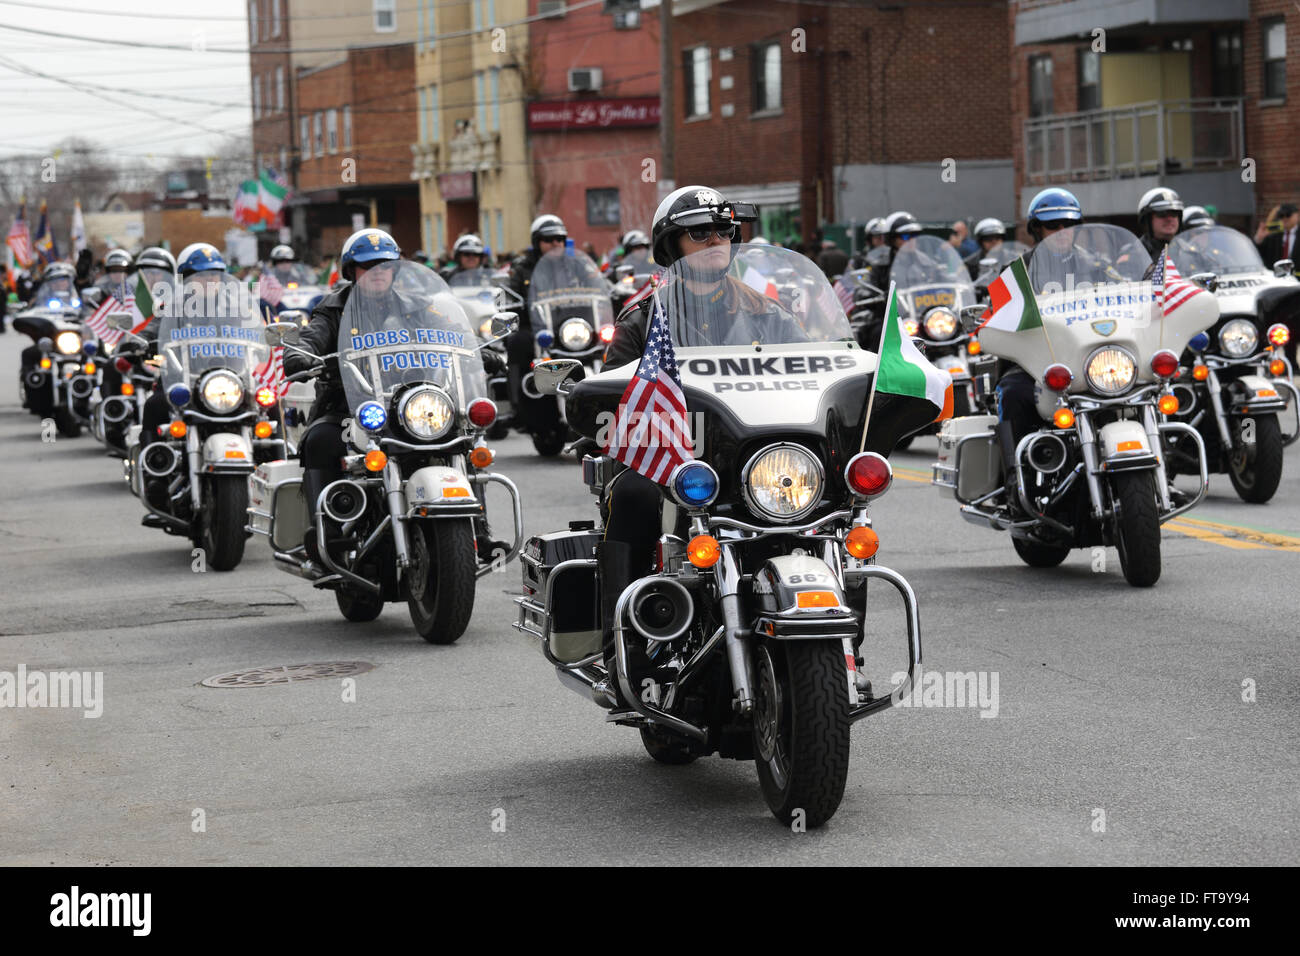 Police motorcycle brigade leads St. Patrick's Day parade Yonkers New York Stock Photo